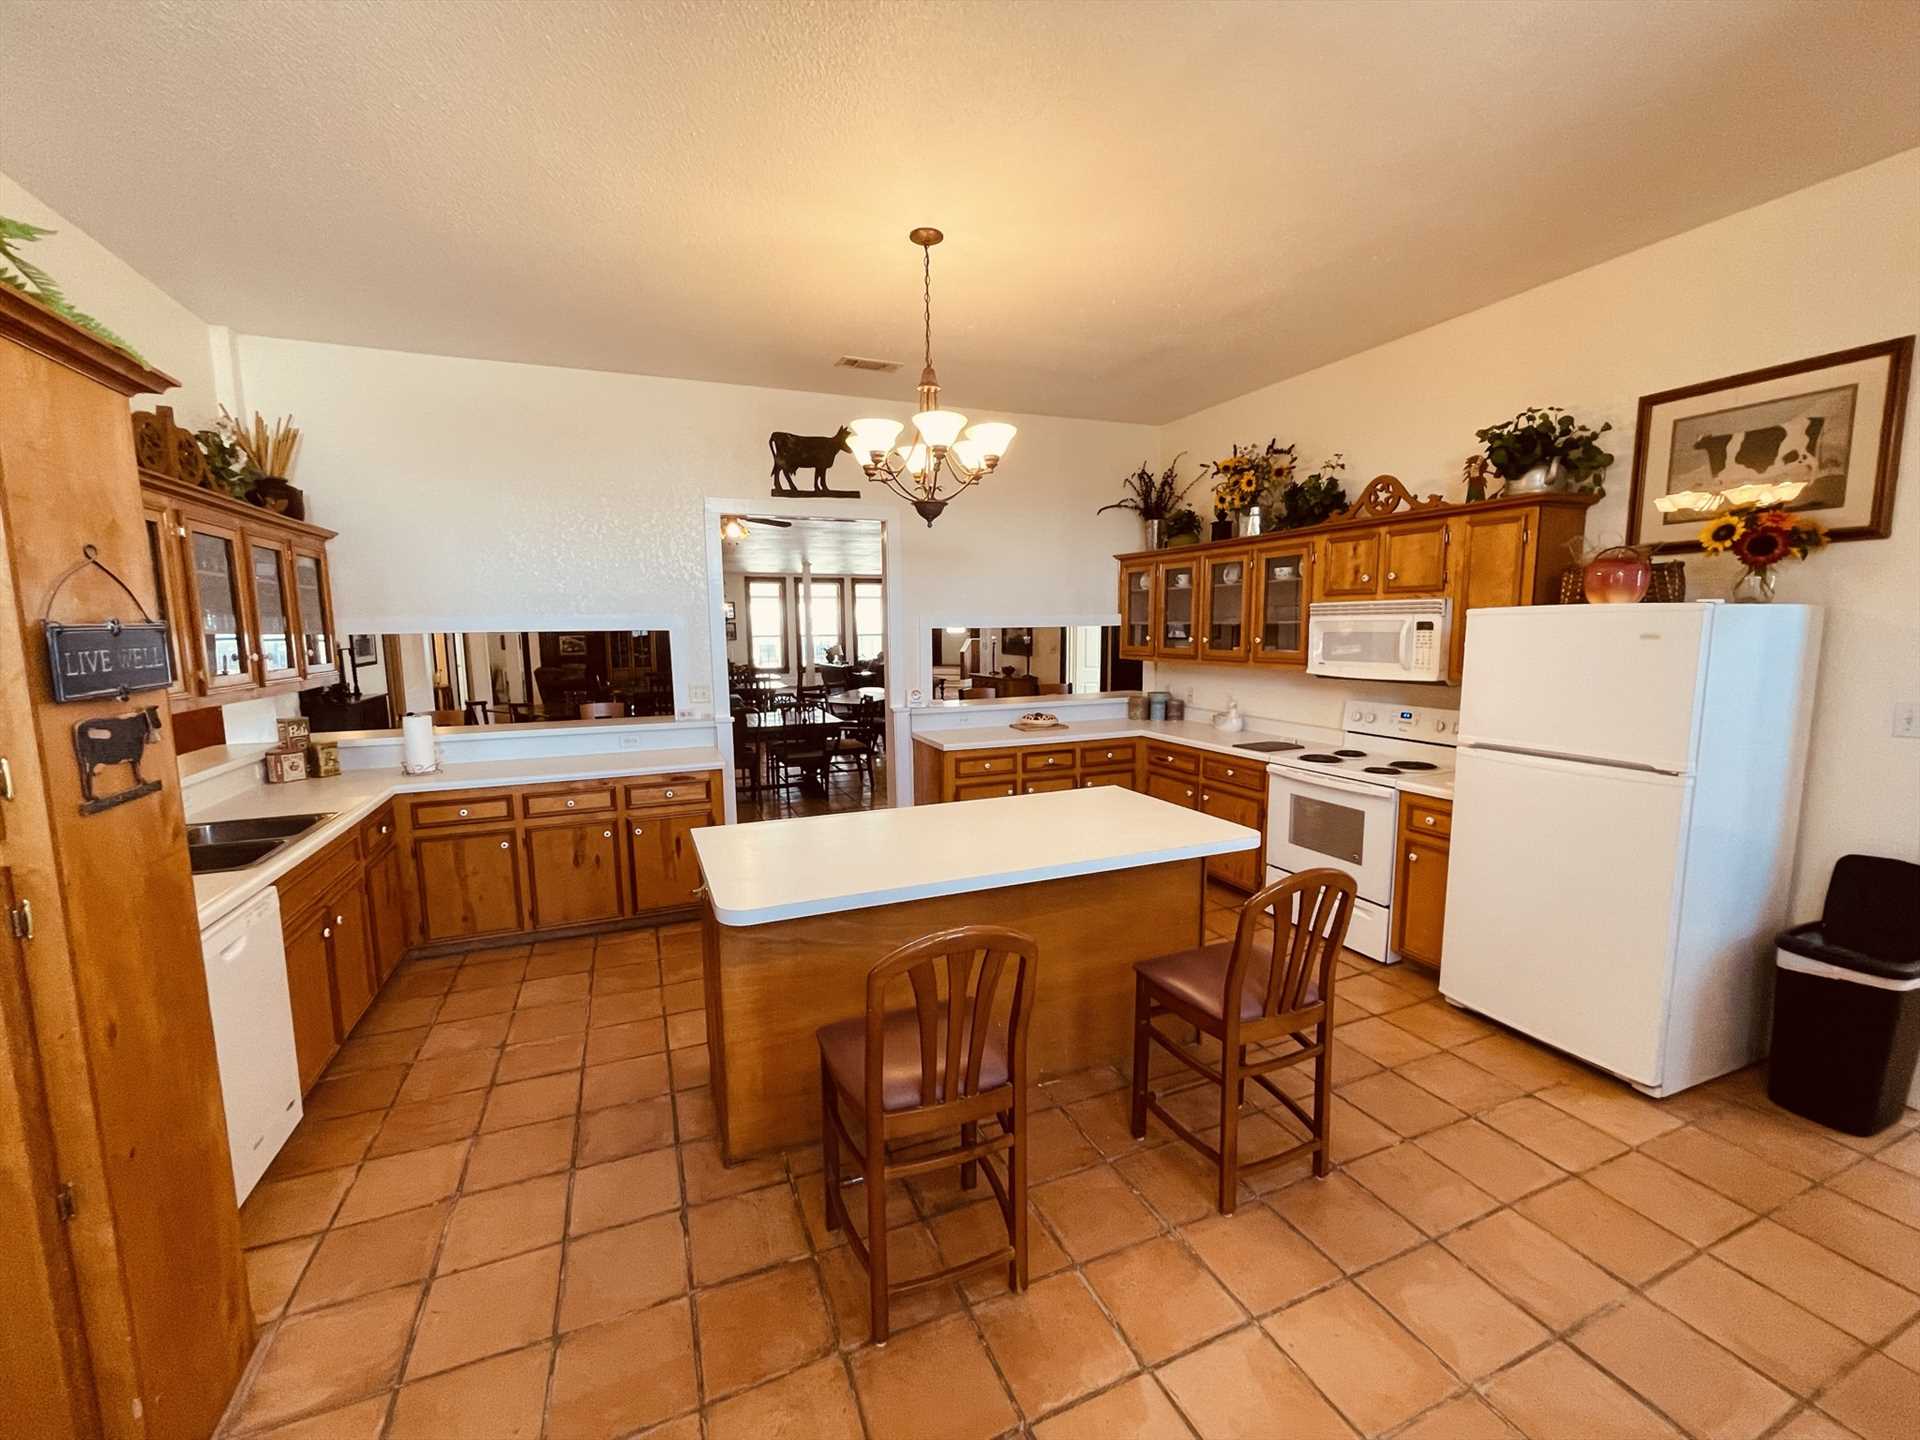                                                 With a big center island, plenty of counter space, cookware, and serving ware, there's everything in the Lodge's kitchen for the cooks in your crew to go wild!